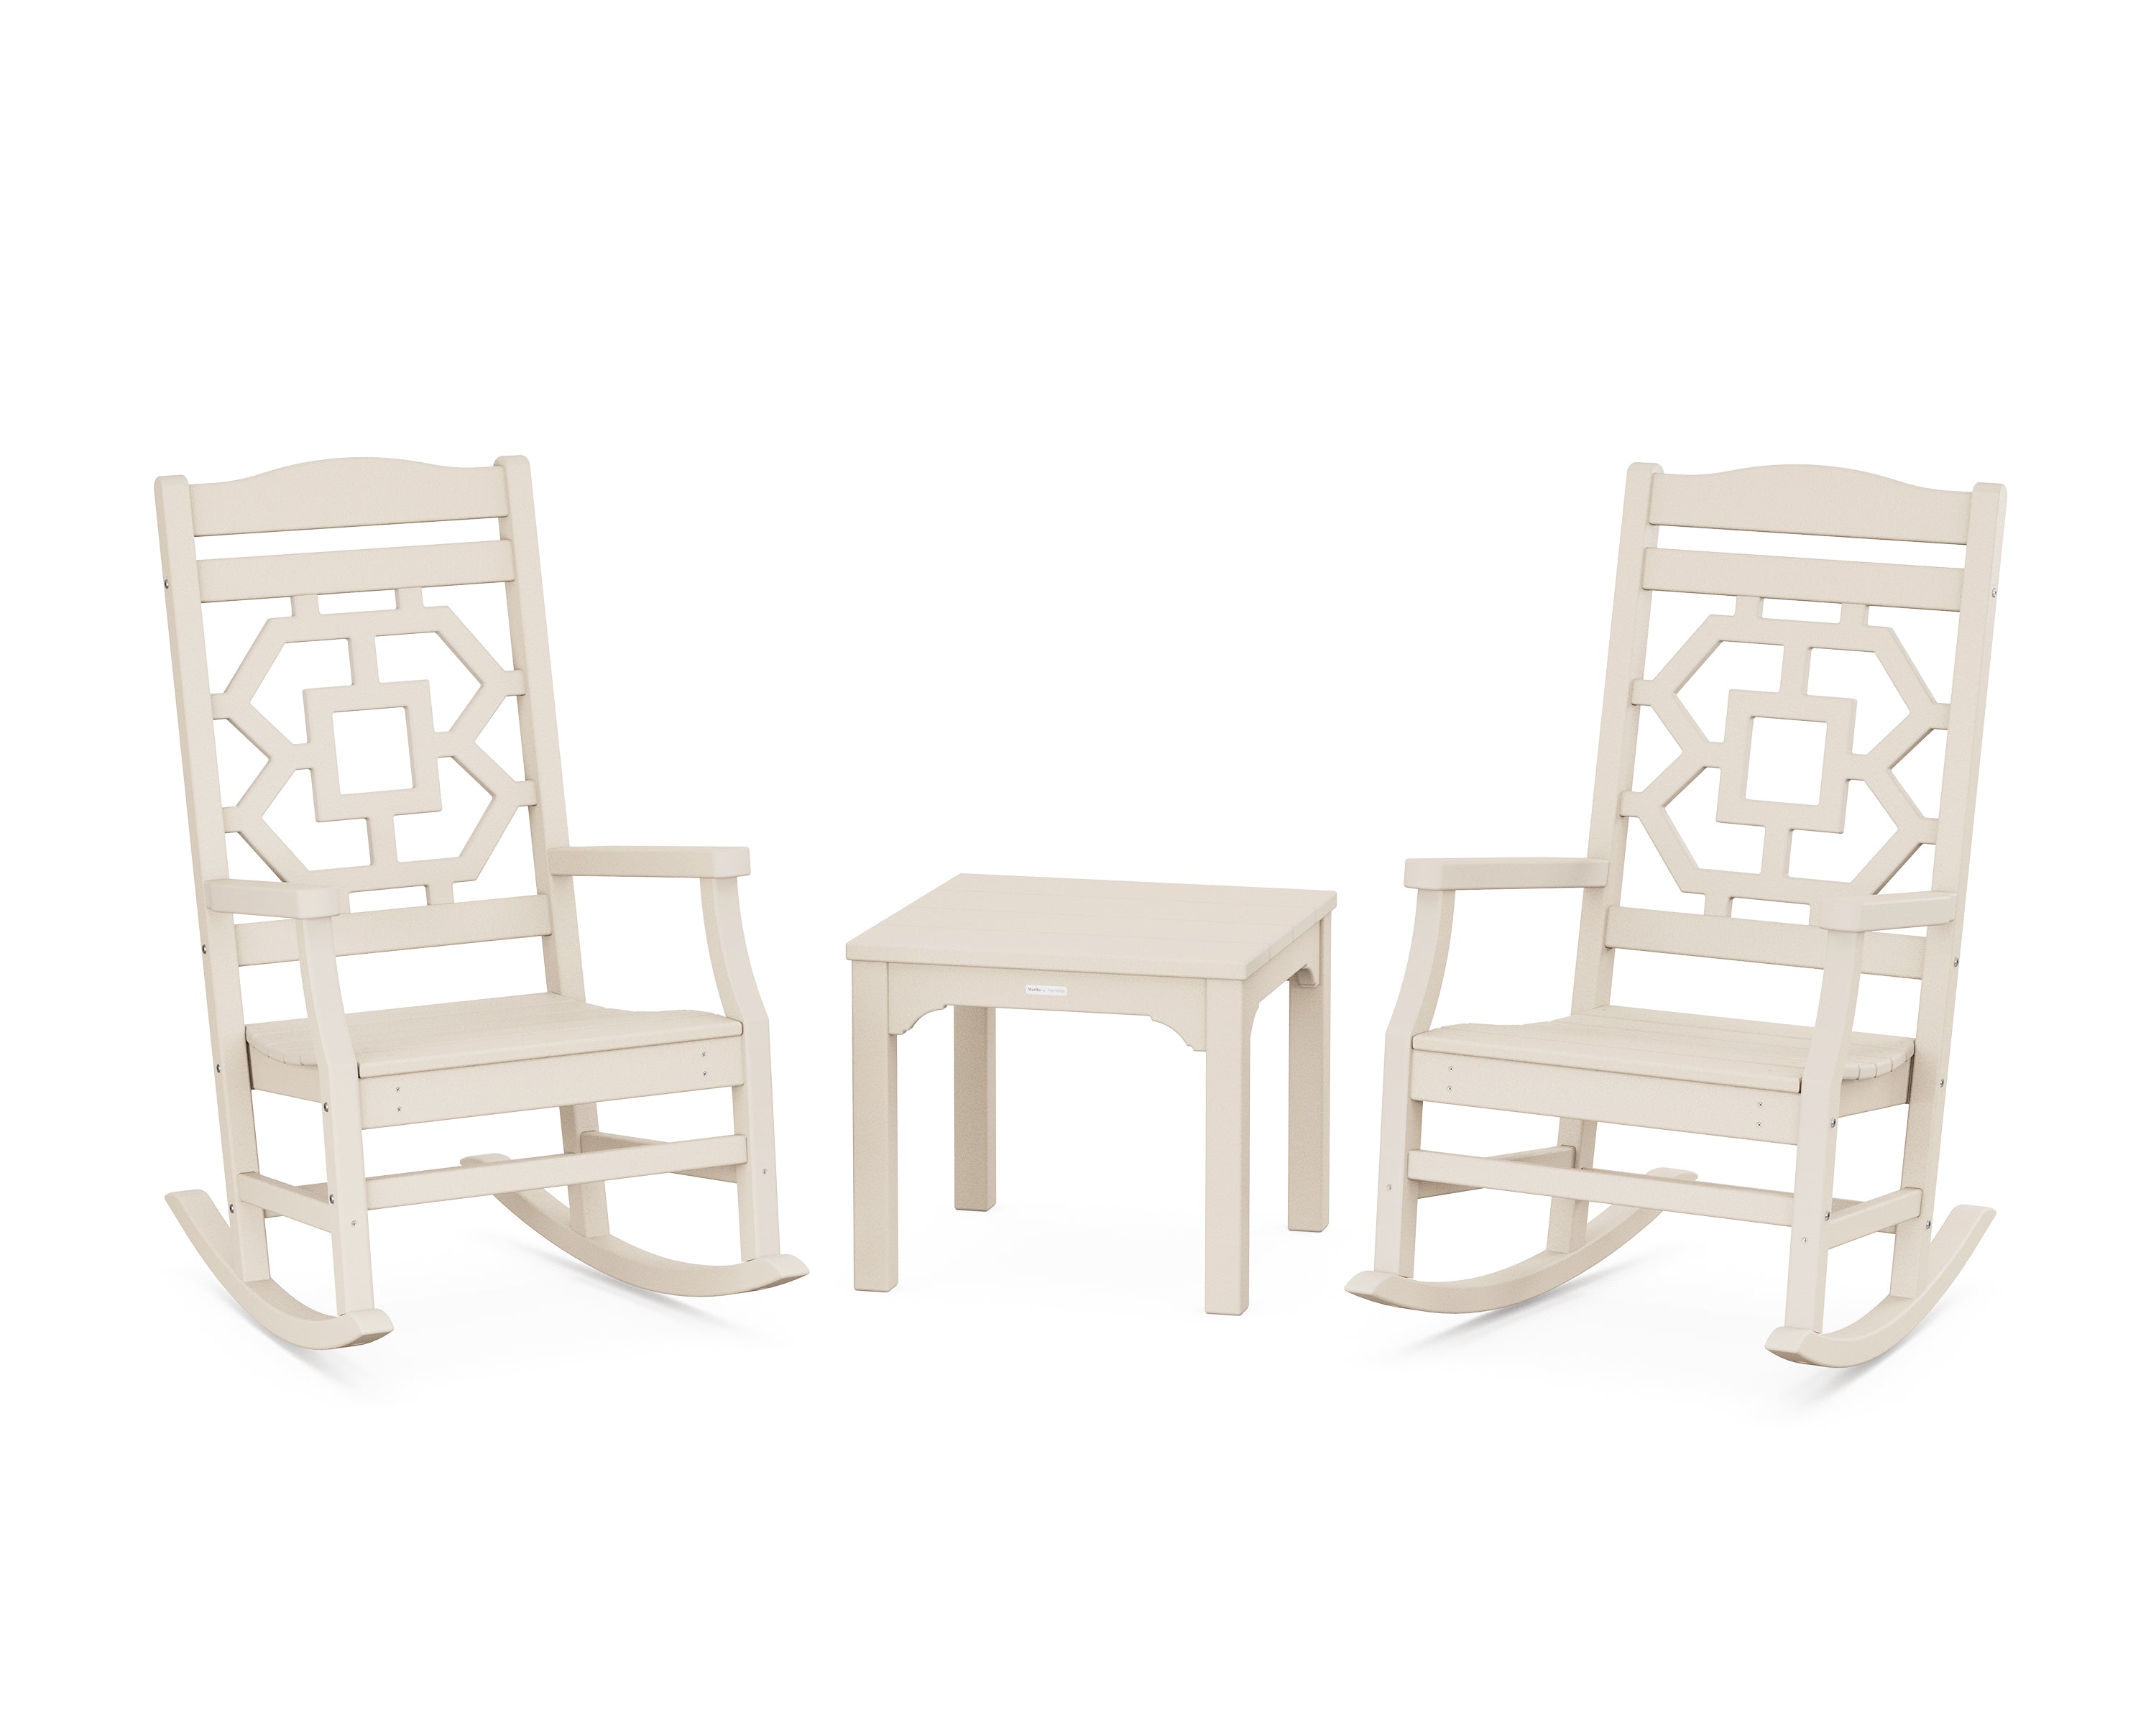 Martha Stewart by POLYWOOD® Chinoiserie 3-Piece Rocking Chair Set in Sand